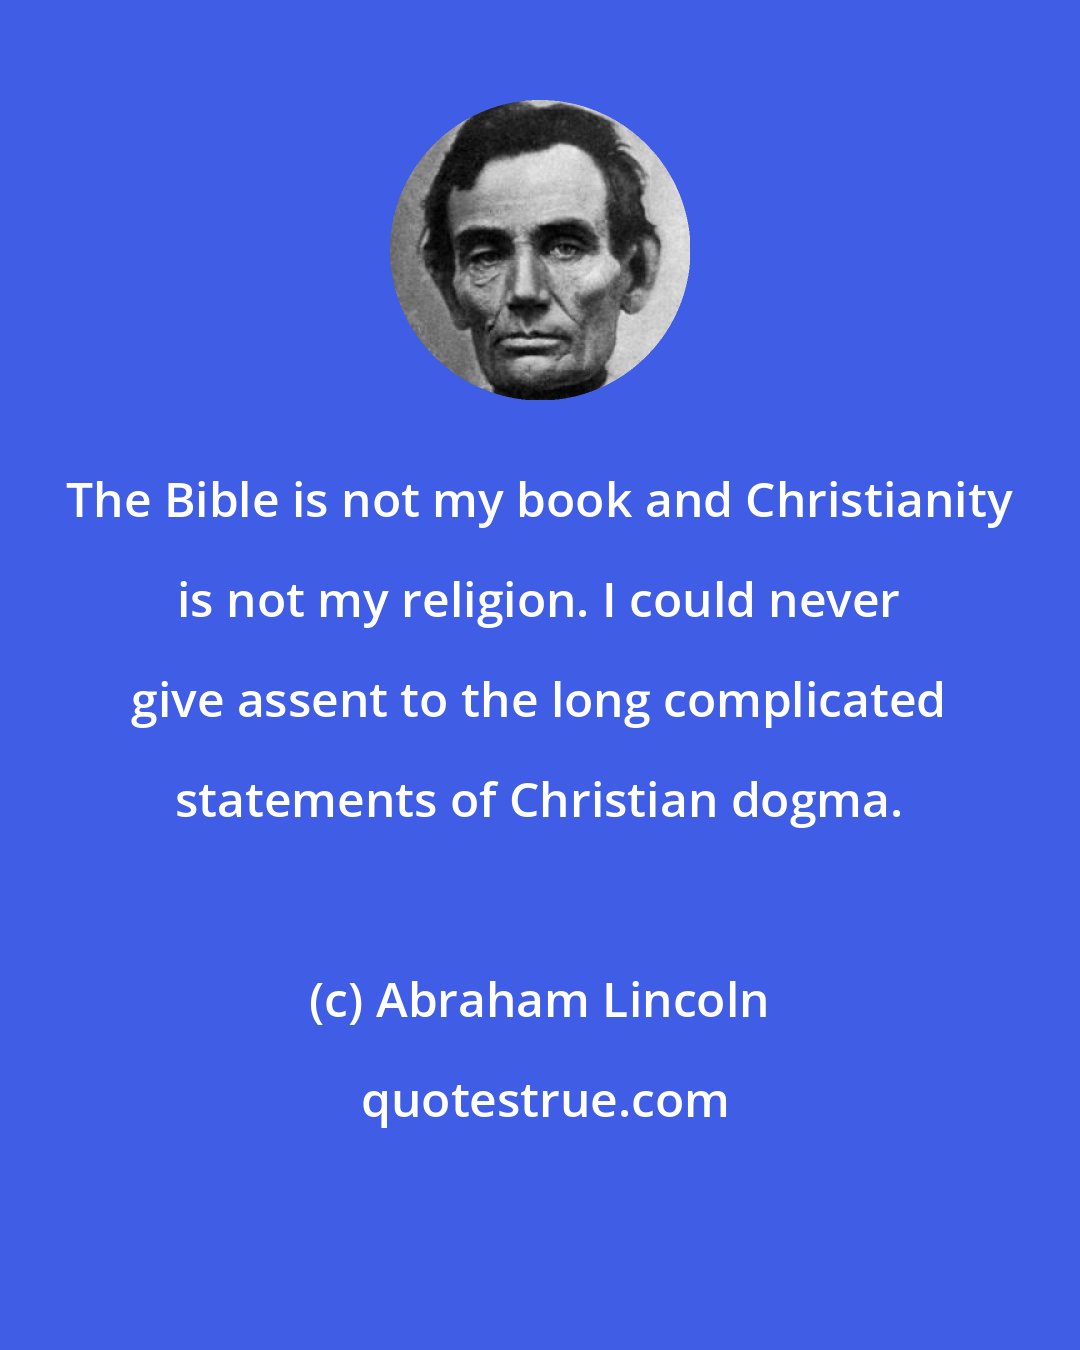 Abraham Lincoln: The Bible is not my book and Christianity is not my religion. I could never give assent to the long complicated statements of Christian dogma.